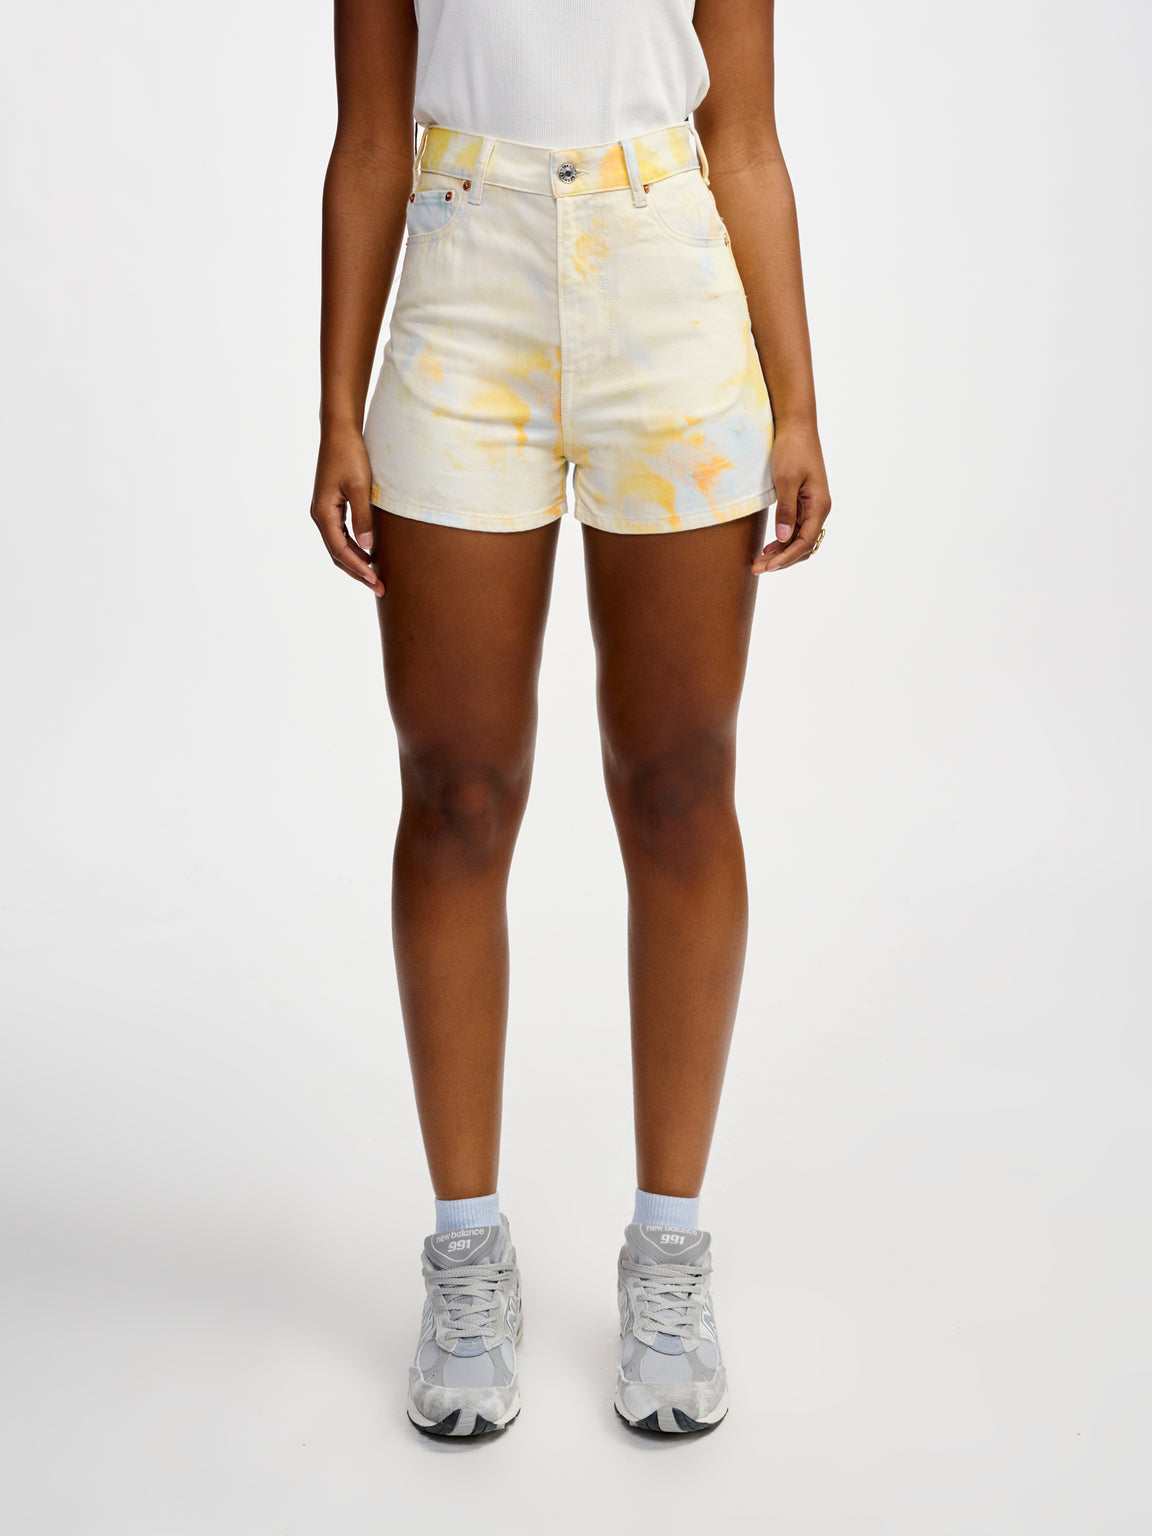 Denim Shorts Party41 Party41 R0890p Icy-Sun